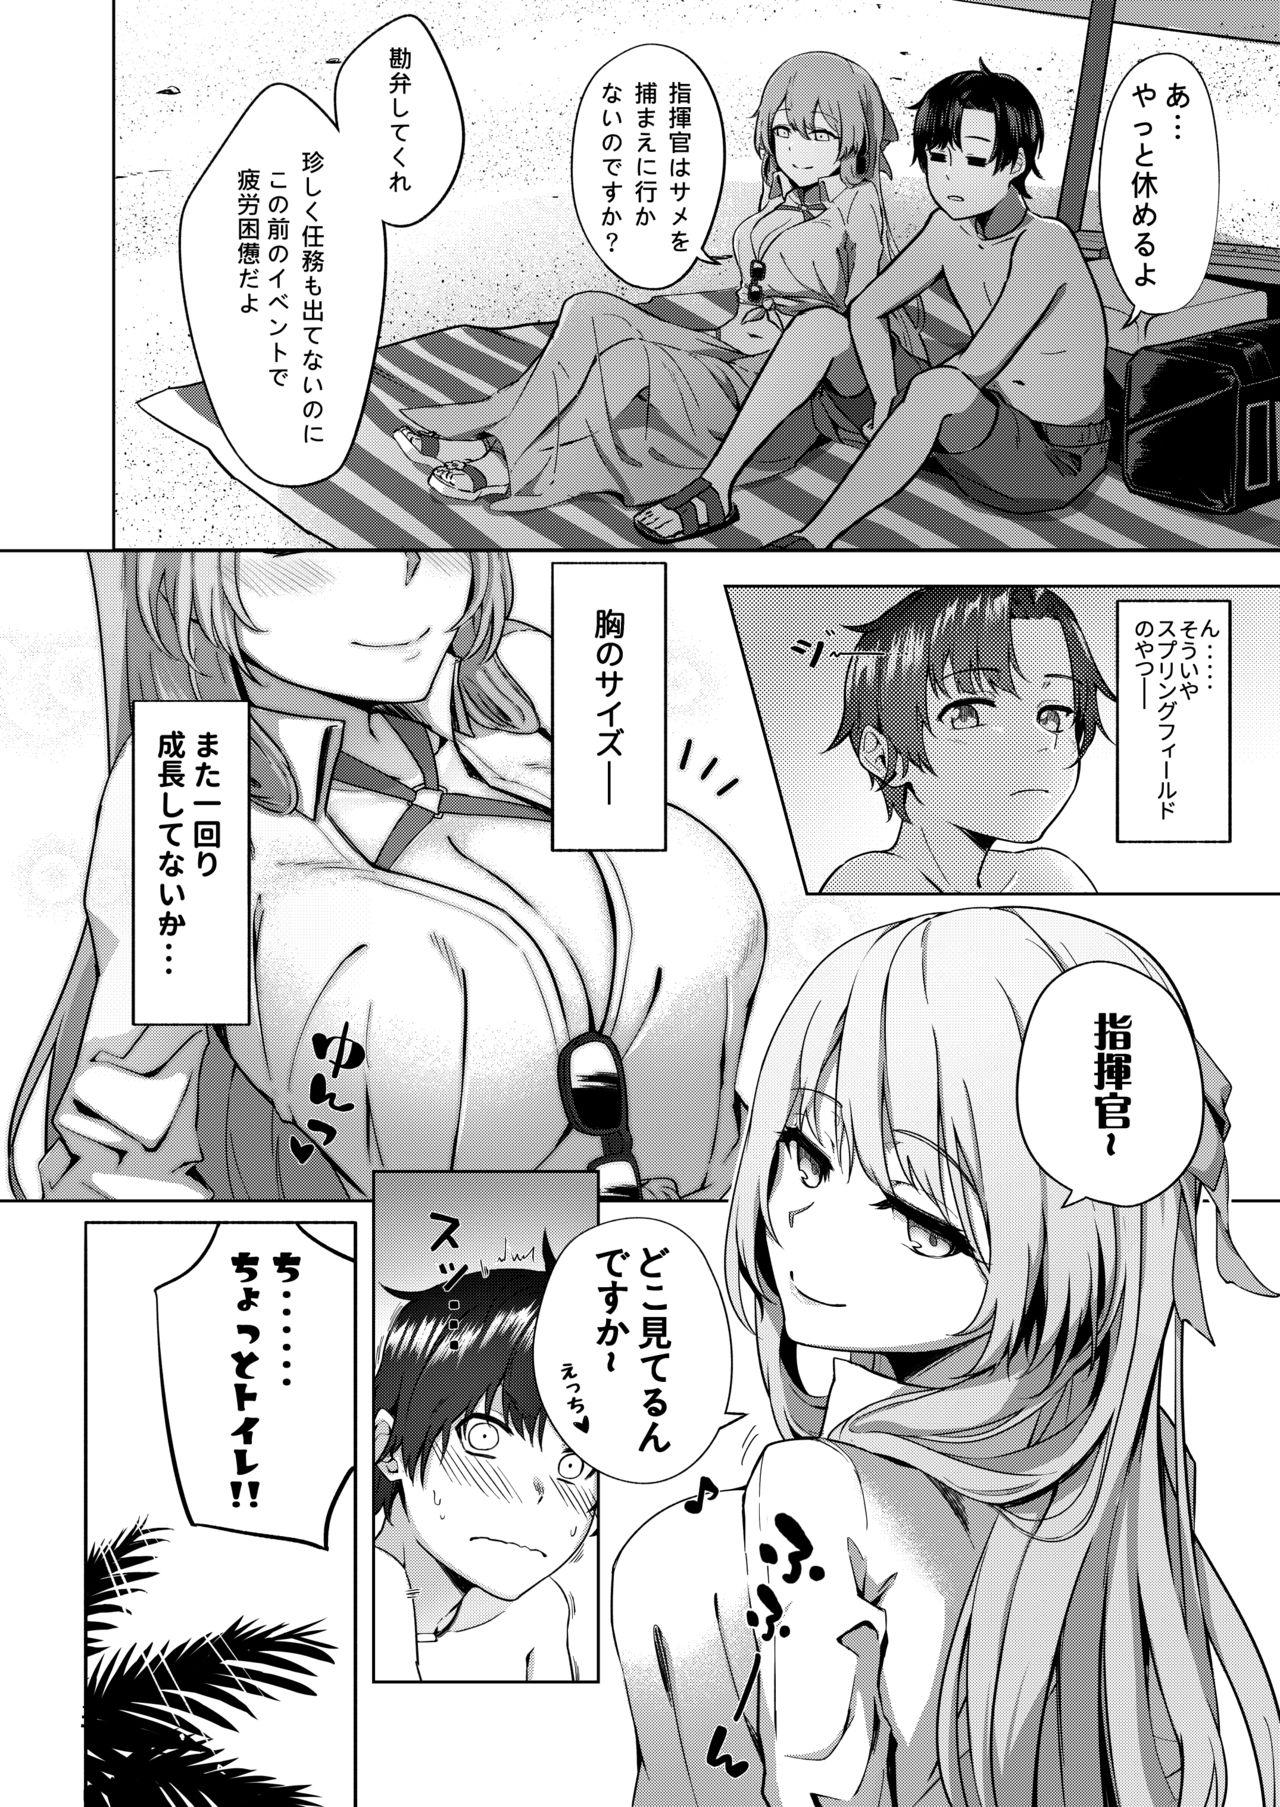 Stockings Field on Fire - Girls frontline Movies - Page 4